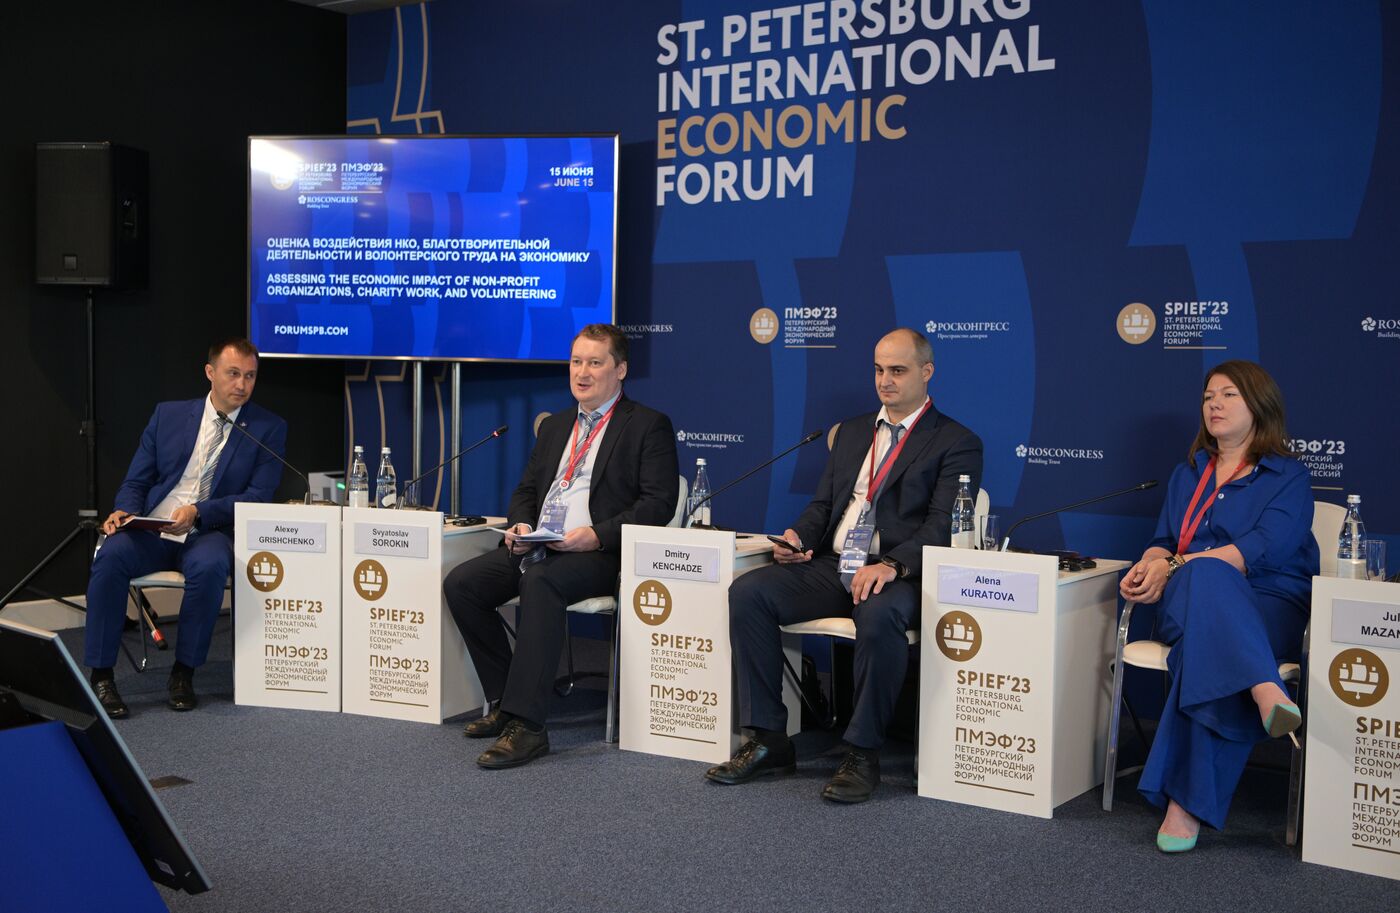 SPIEF-2023. Assessing the Economic Impact of Non-Profit Organizations, Charity Work, and Volunteering